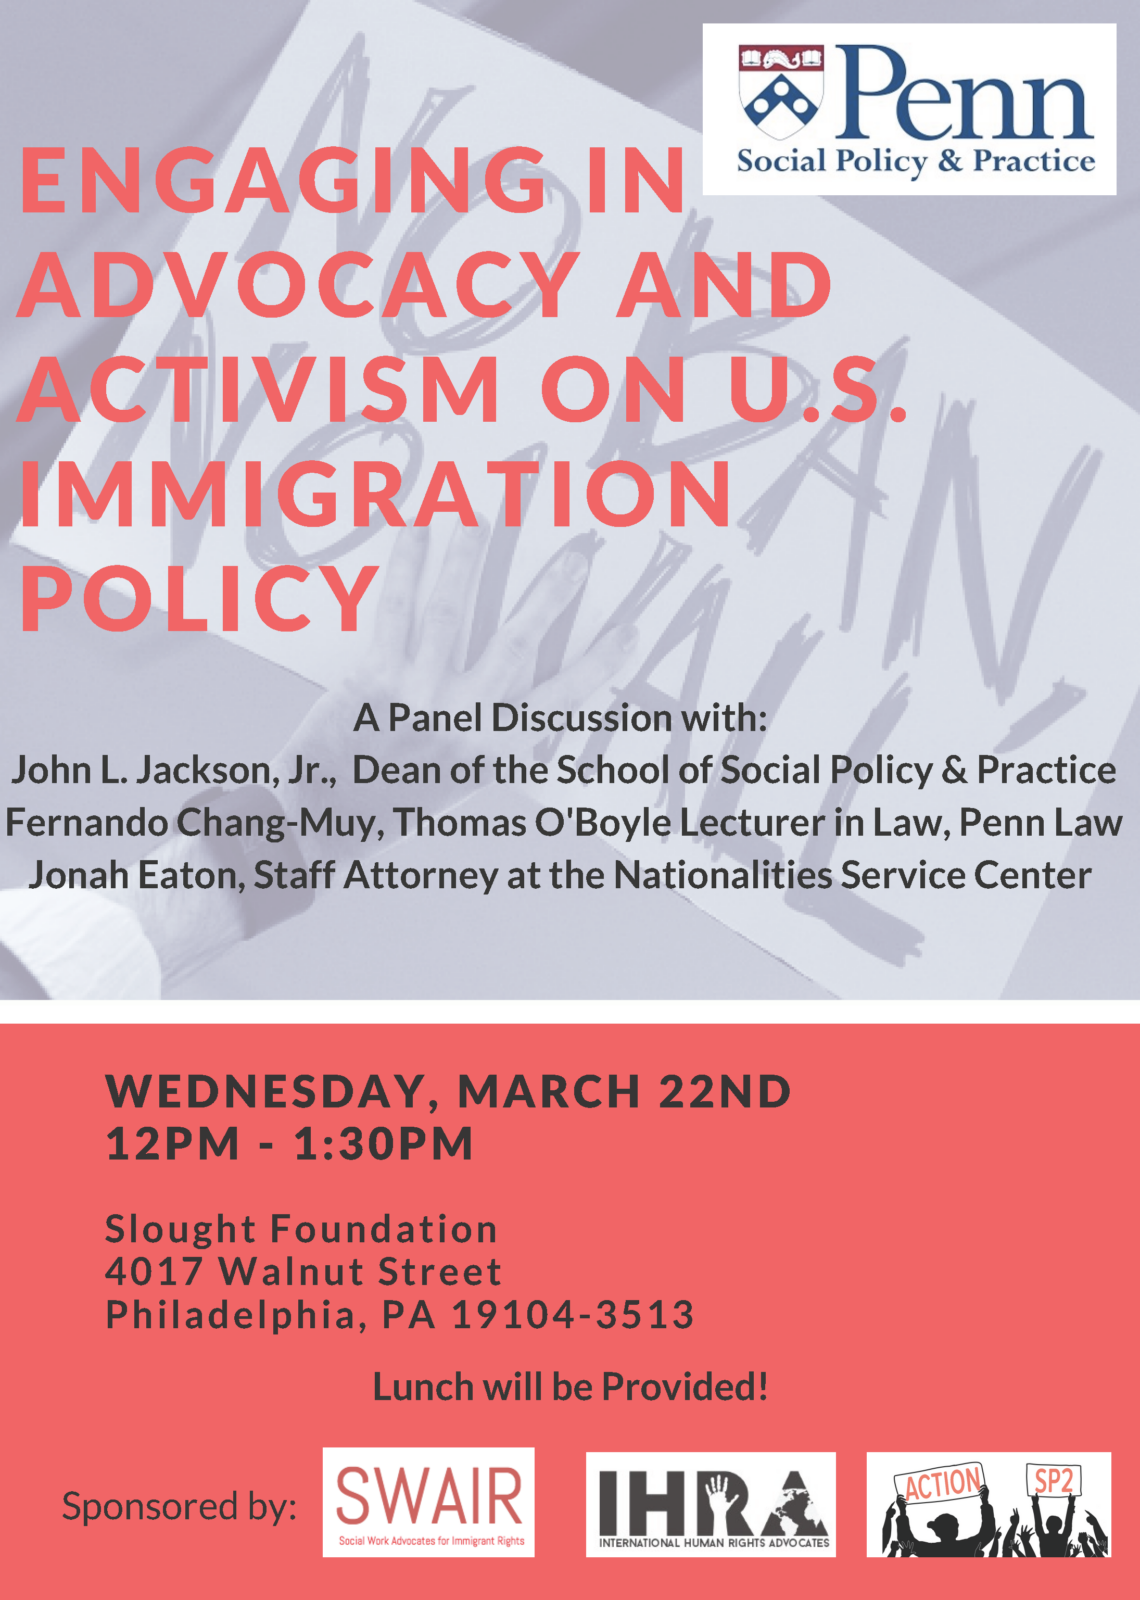 Flyer for Engaging in Advocacy & Activism on U.S. Immigration Policy event